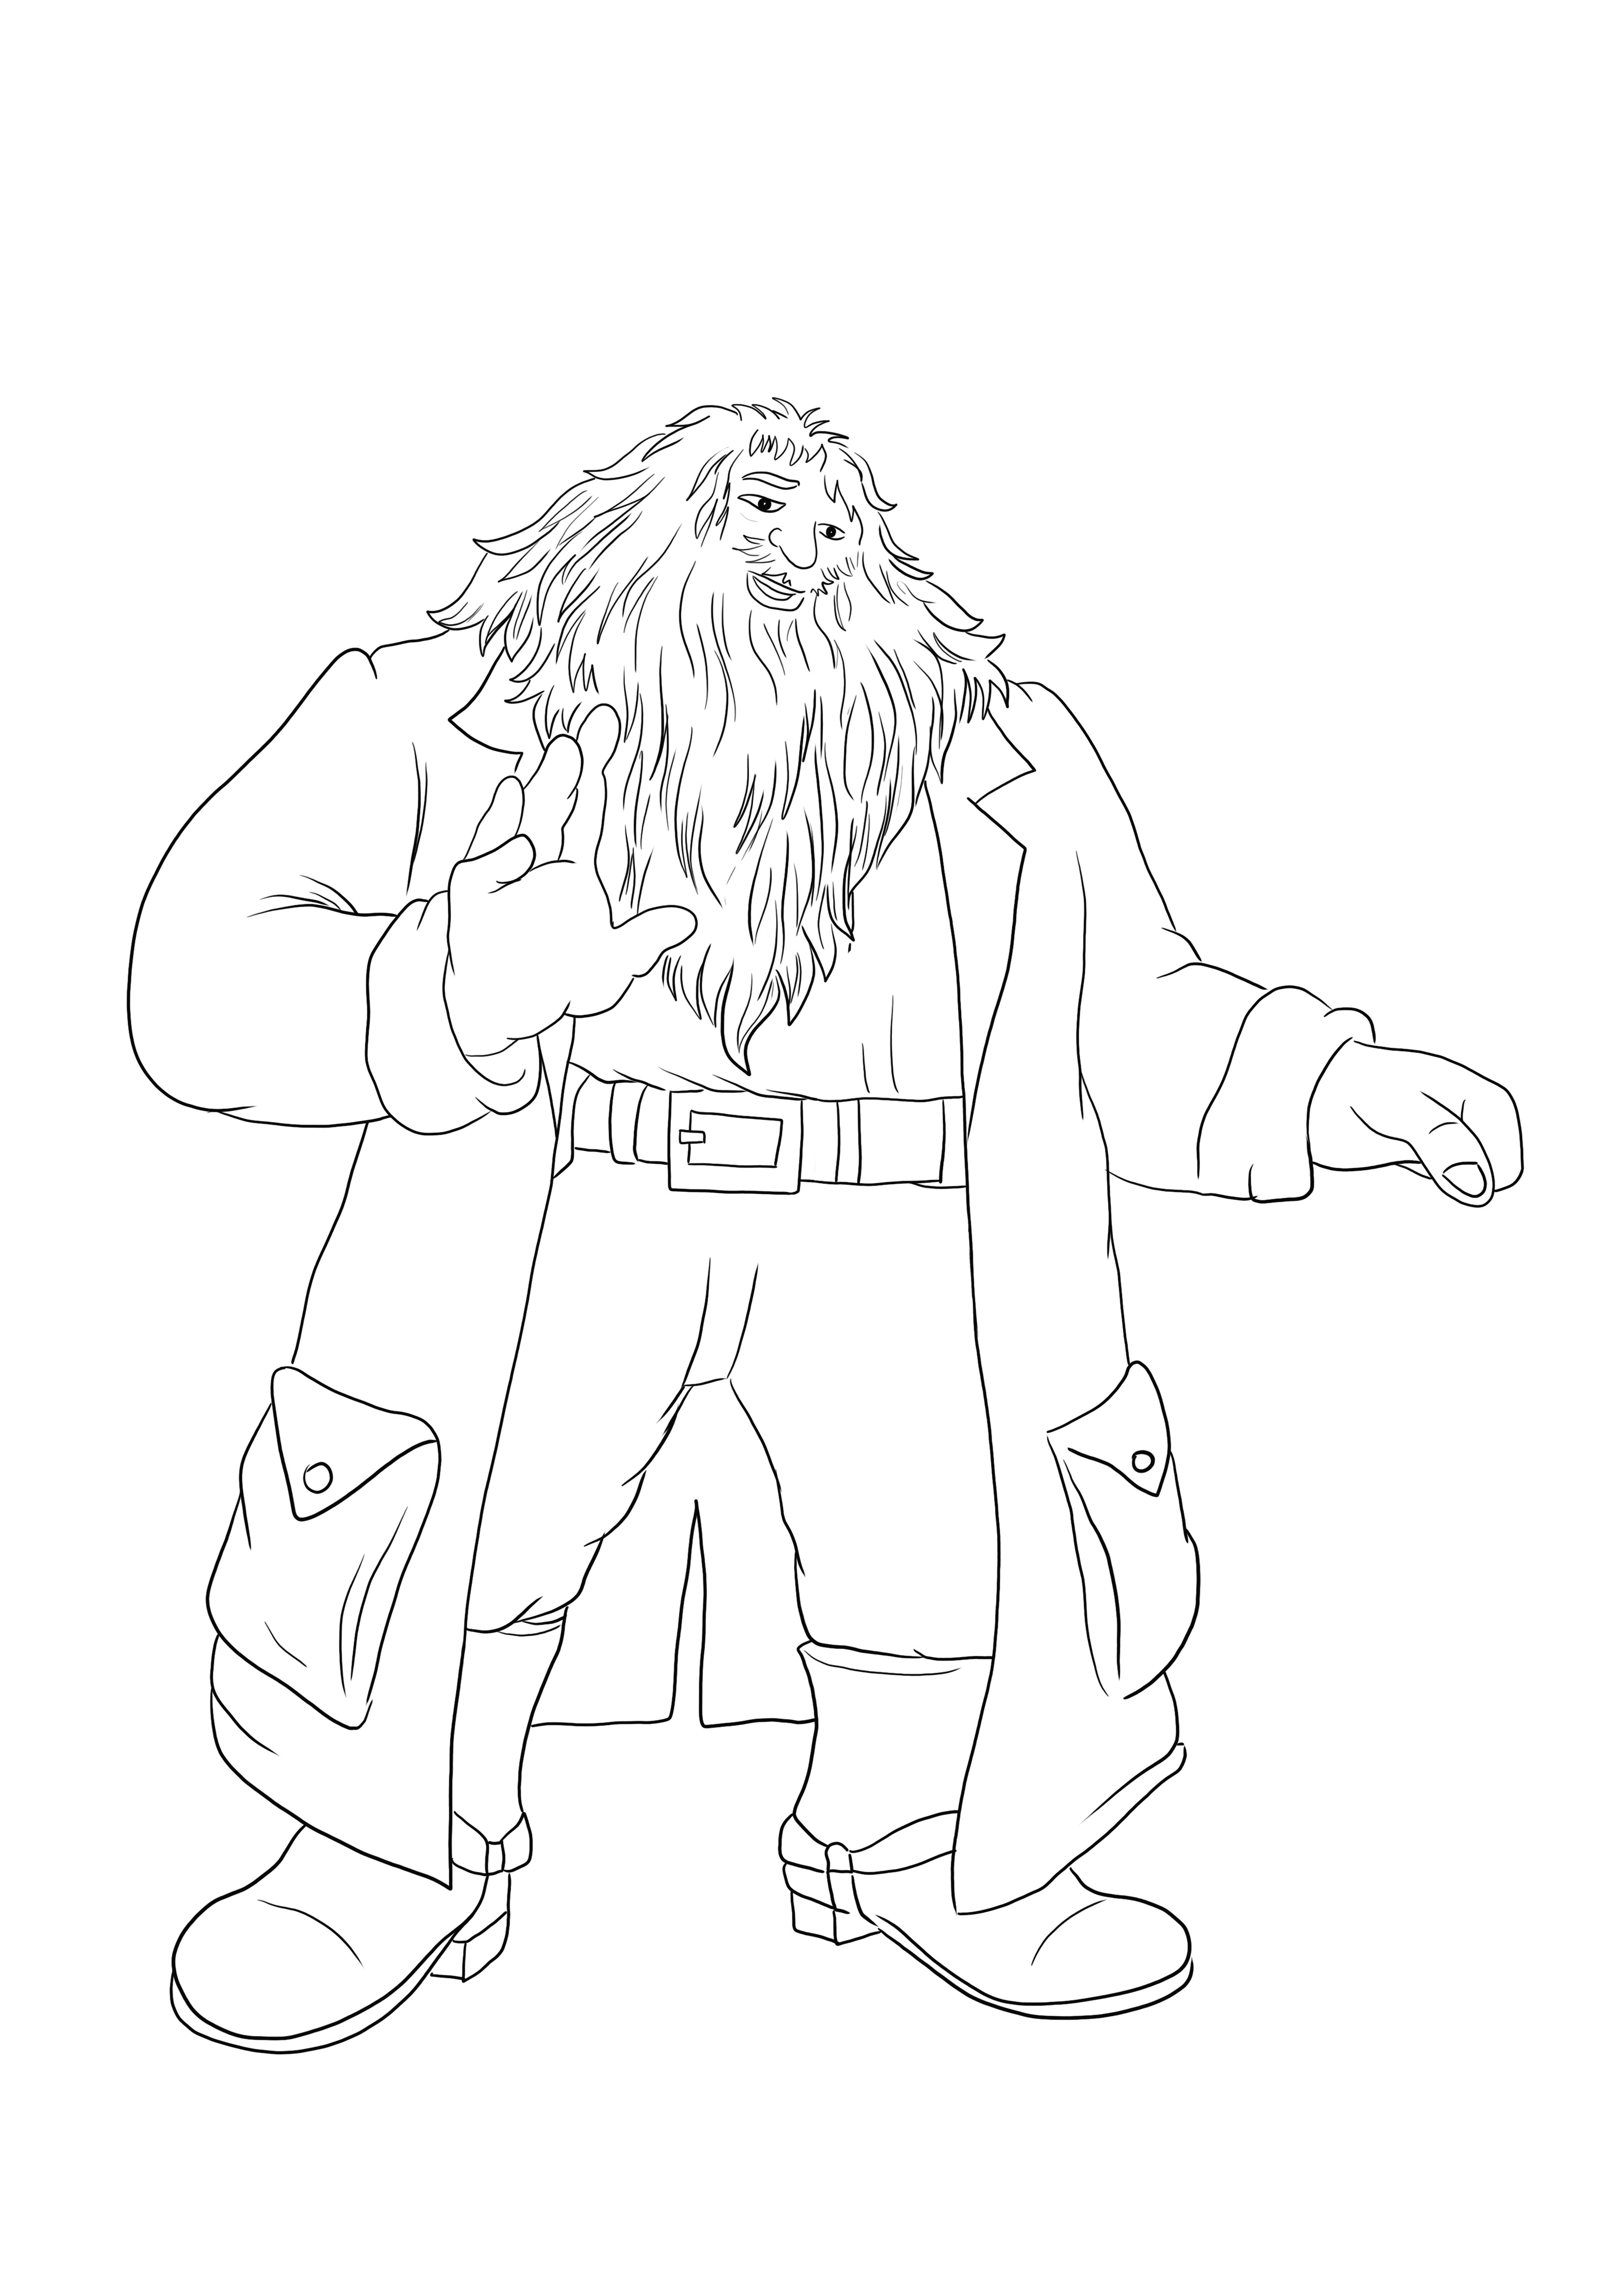 Hagrid from the Harry Potter saga free to print and color for all Harry potter fans